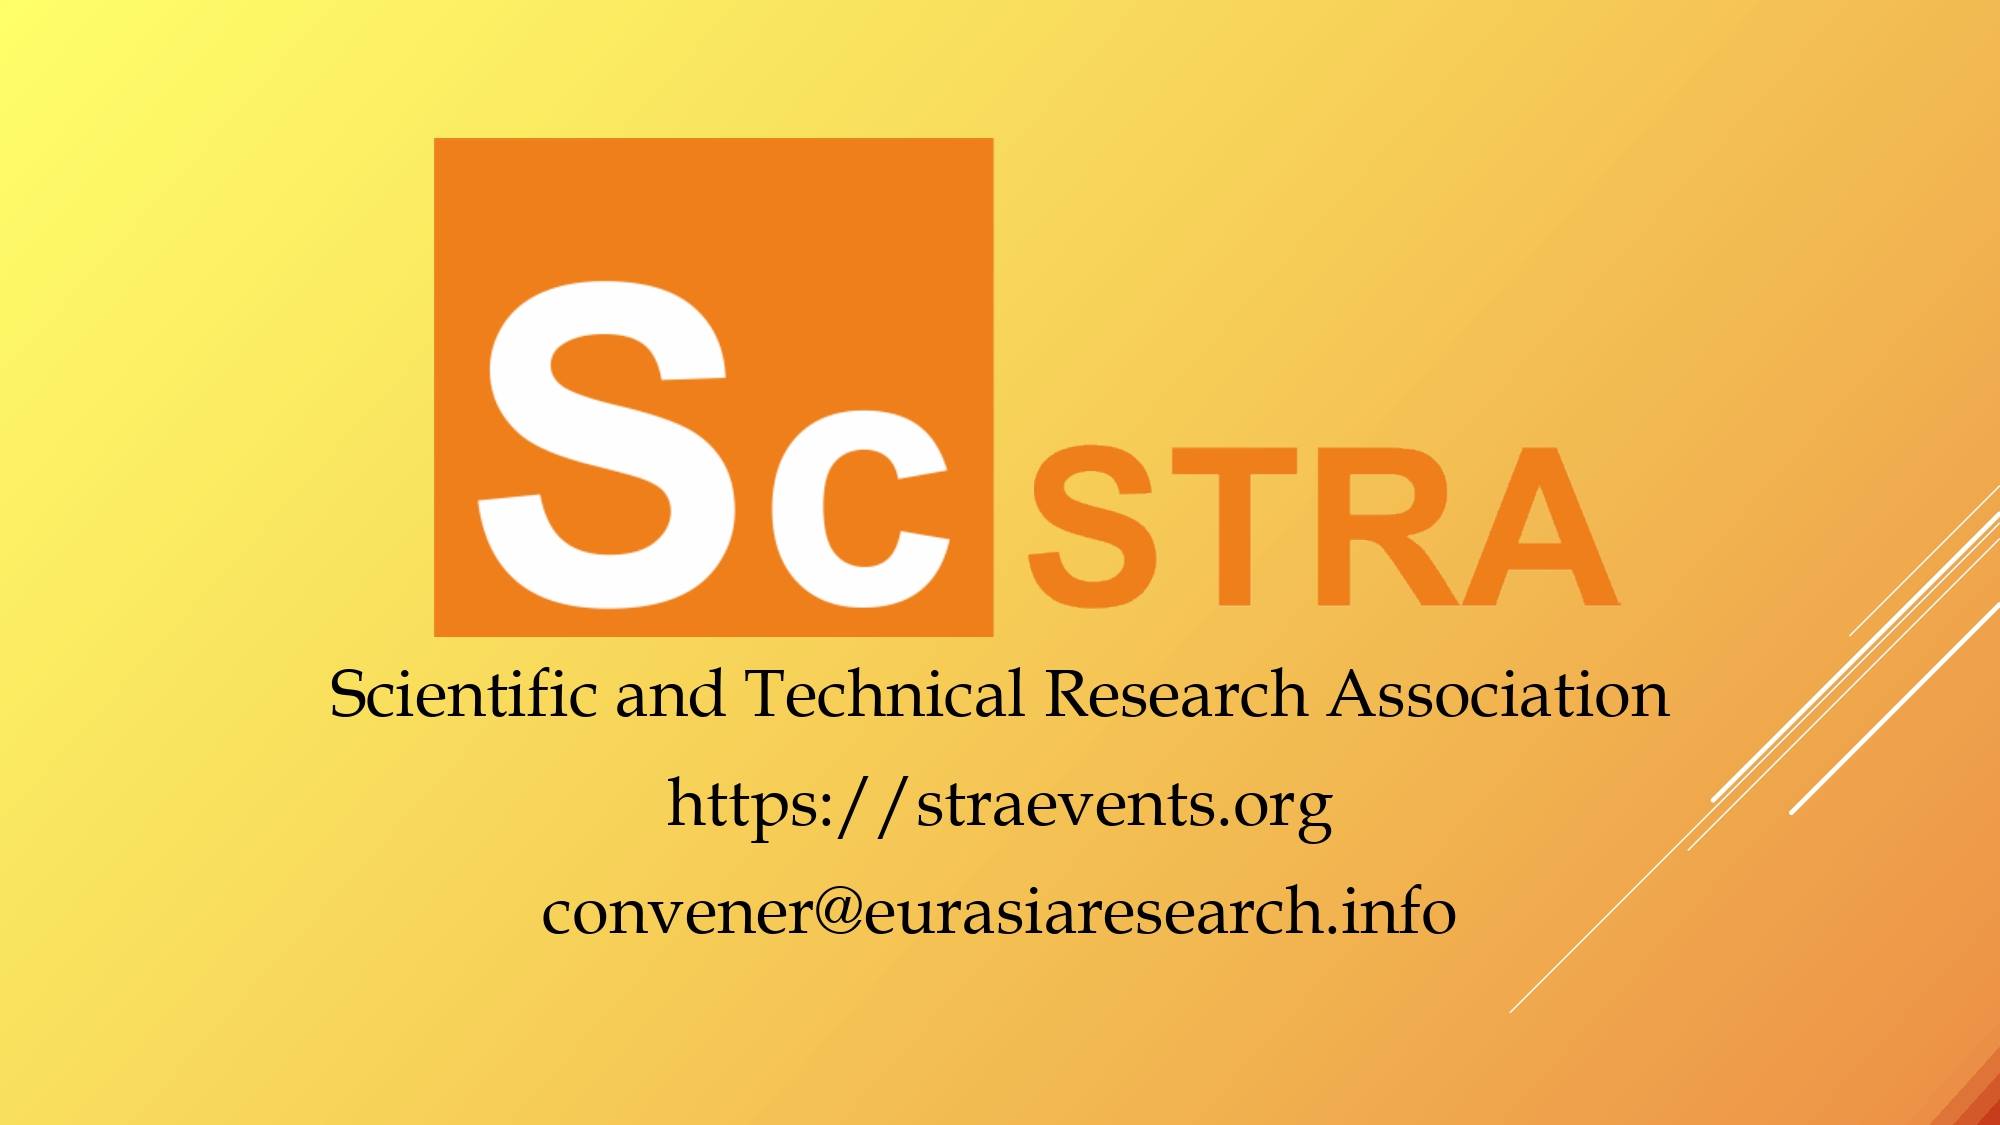 4th ICSTR Athens – International Conference on Science & Technology Research, 16-17 September 2022